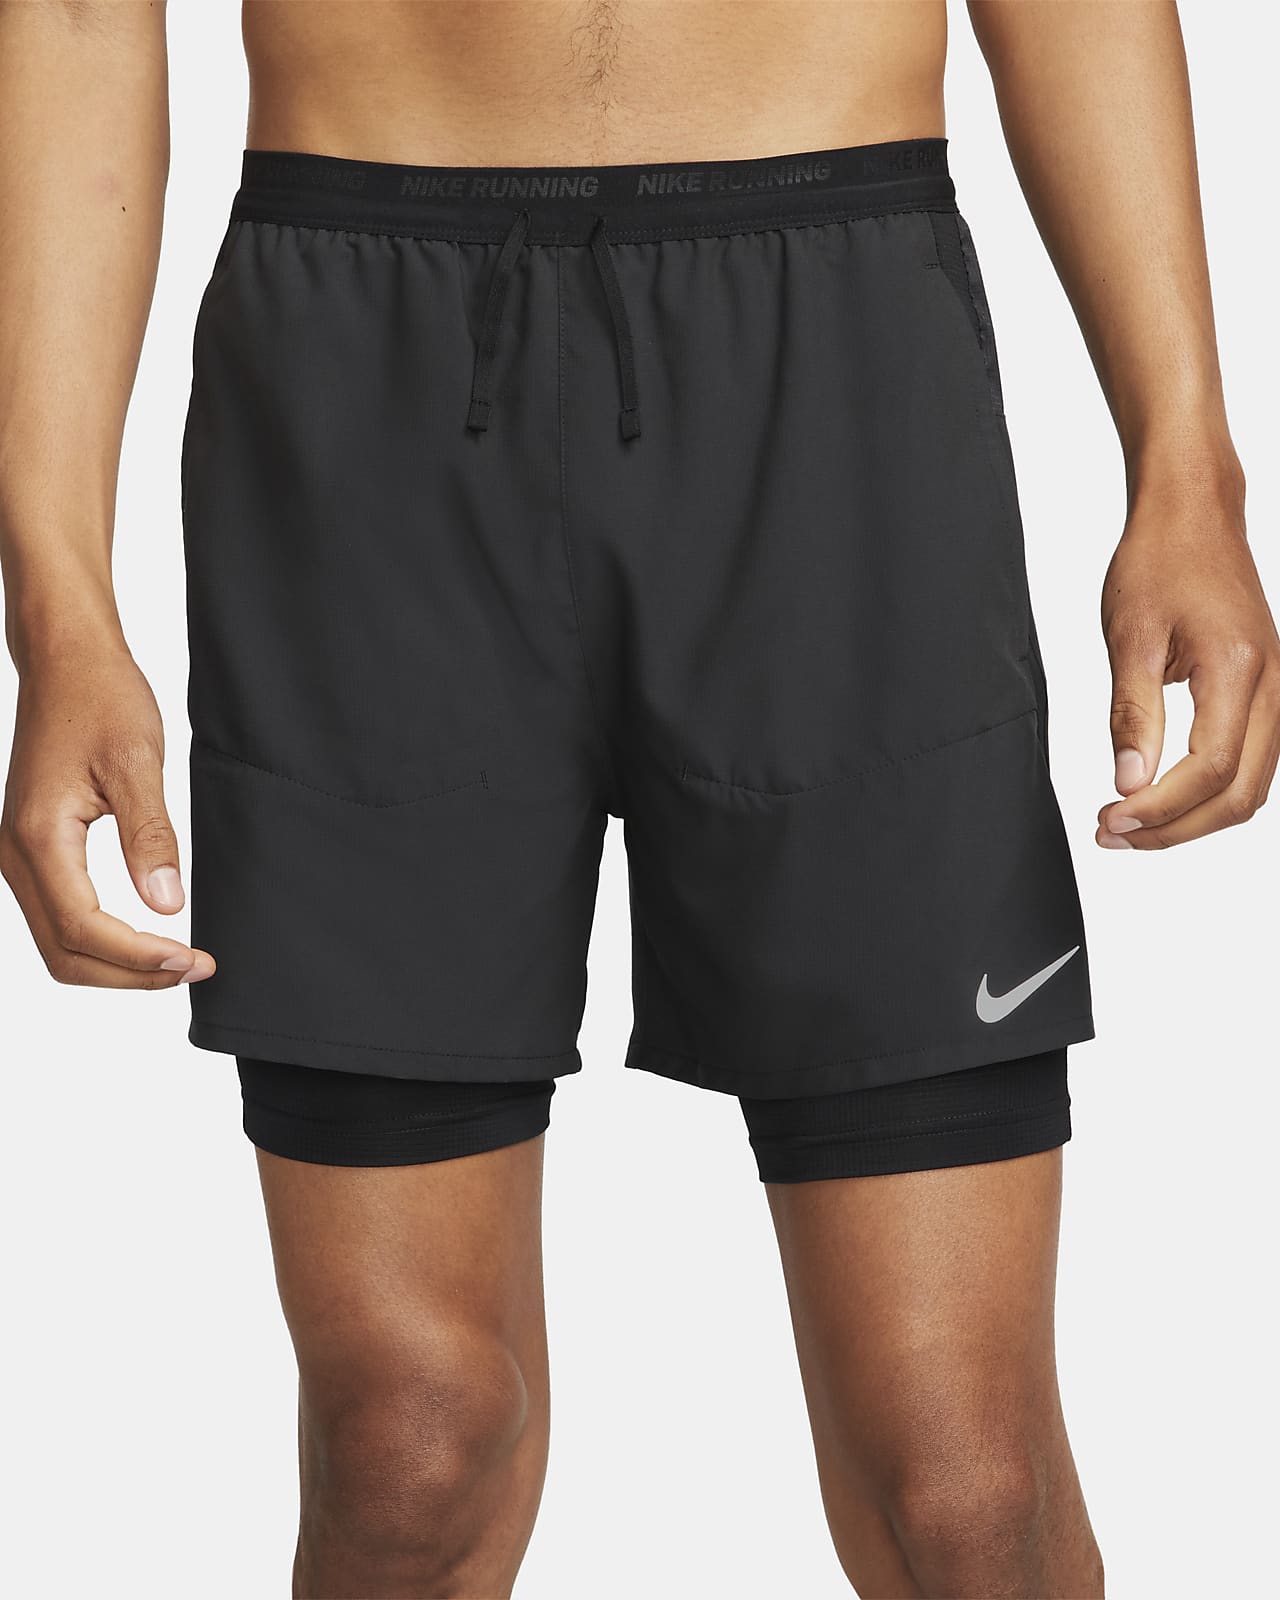 Women's Nike Dri Fit Black Running Shorts With Built In Underwear Size  Small New